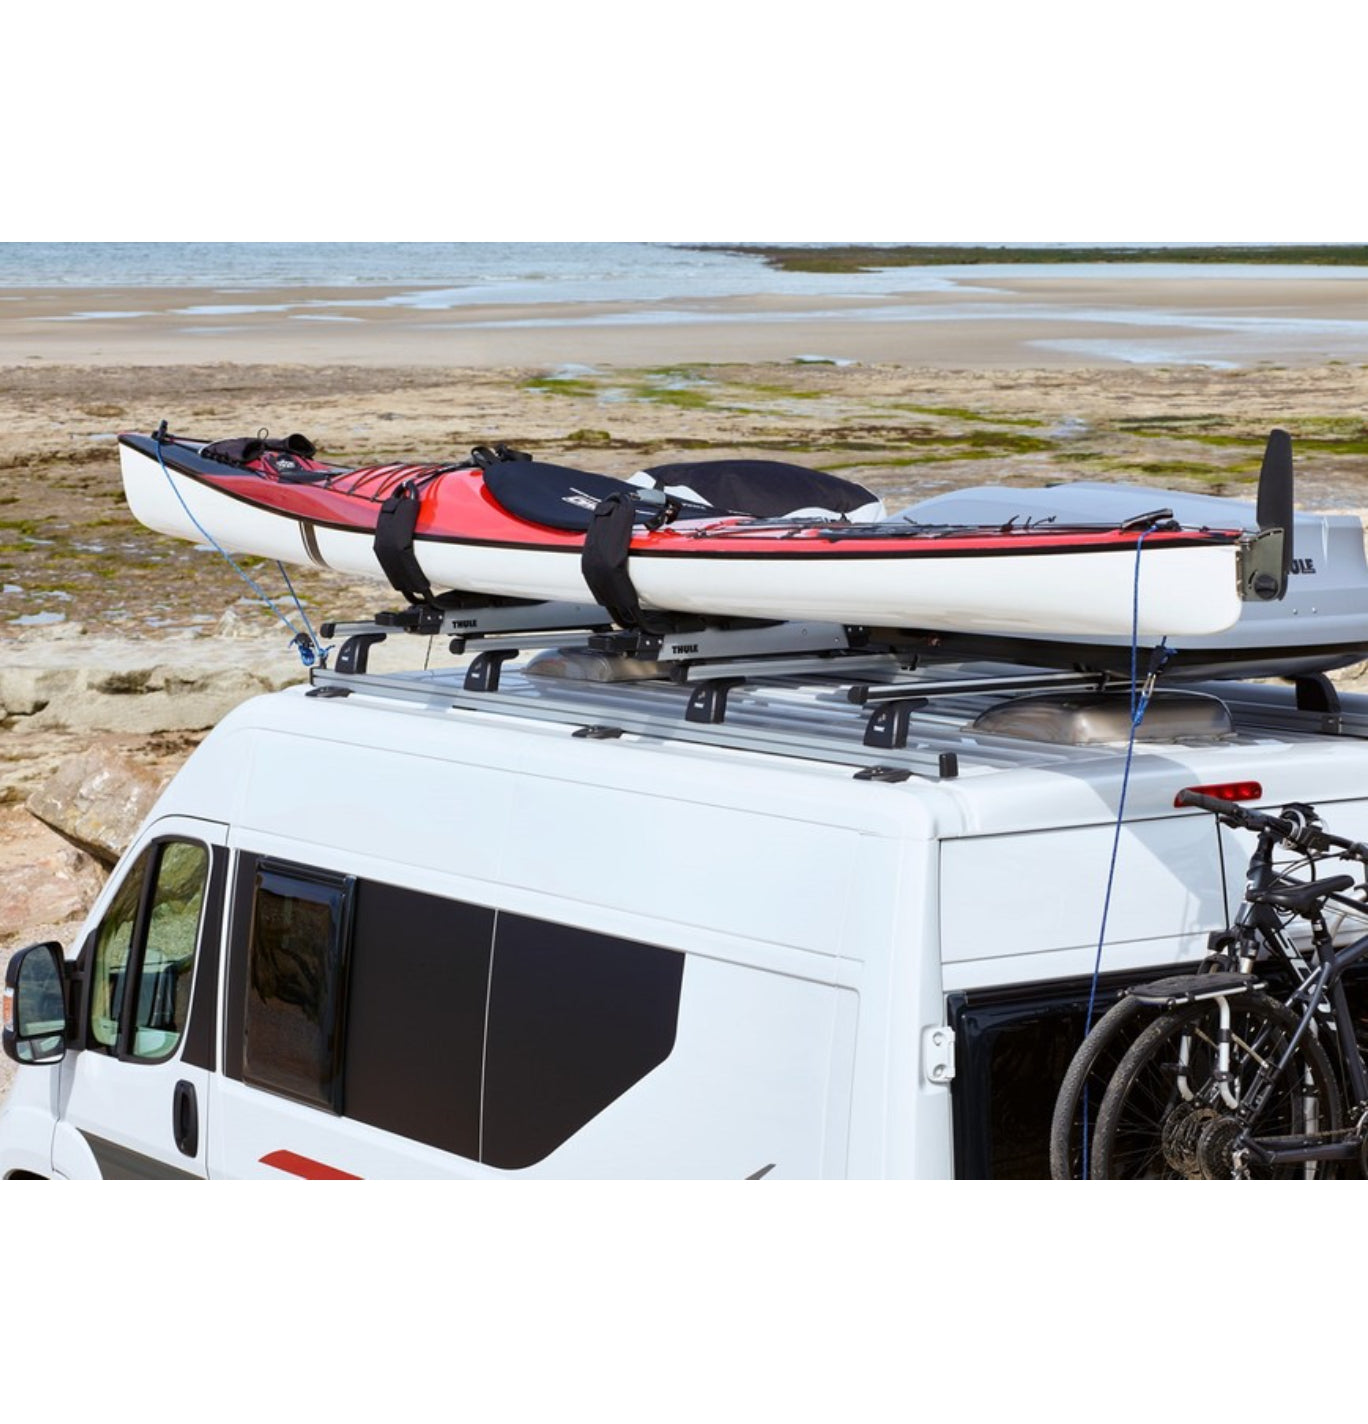 Thule SmartClamp Roof Rack Mounting System Image